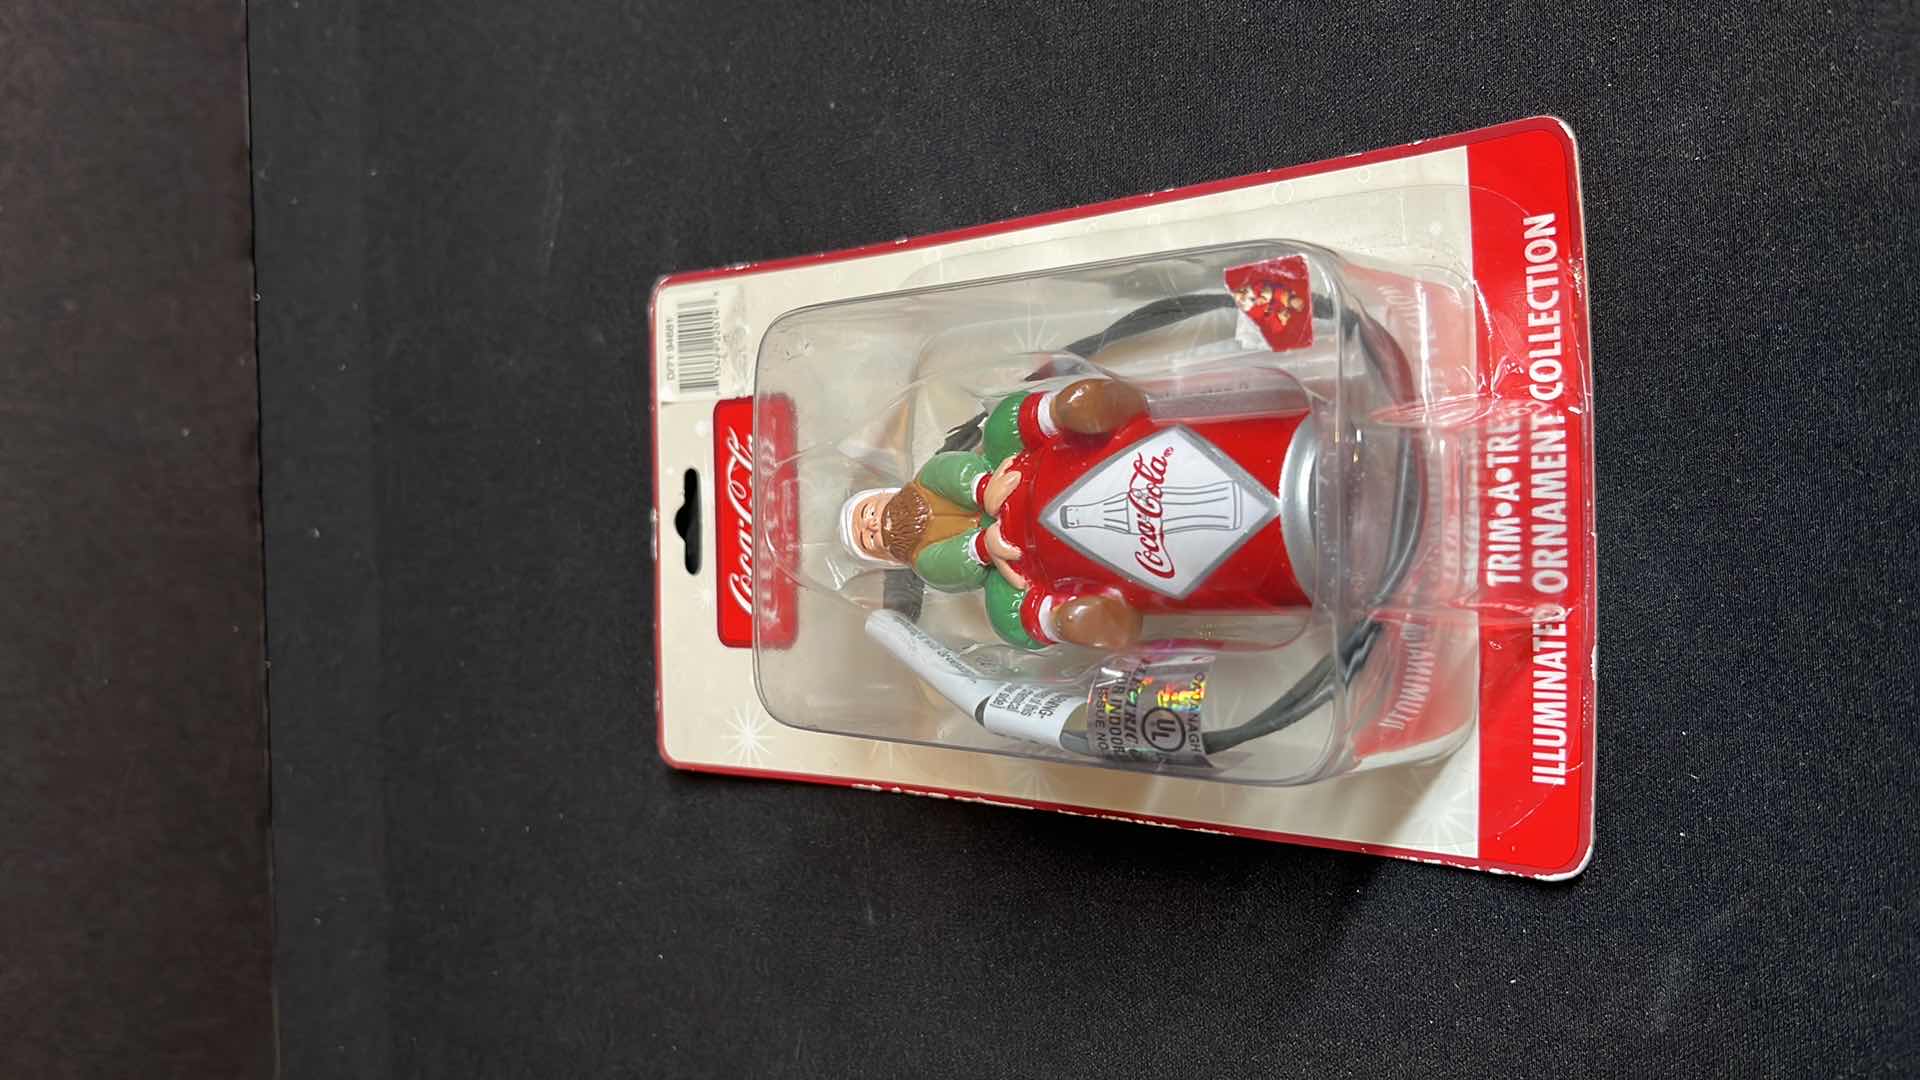 Photo 5 of COCA-COLA CHRISTMAS ORNAMENTS, TOWN SQUARE COLLECTION SPECIAL DELIVERY 1994 (ITEM #64326), TRIM A TREE ILLUMINATED ORNAMENT 2003 (ITEM #CA079912)